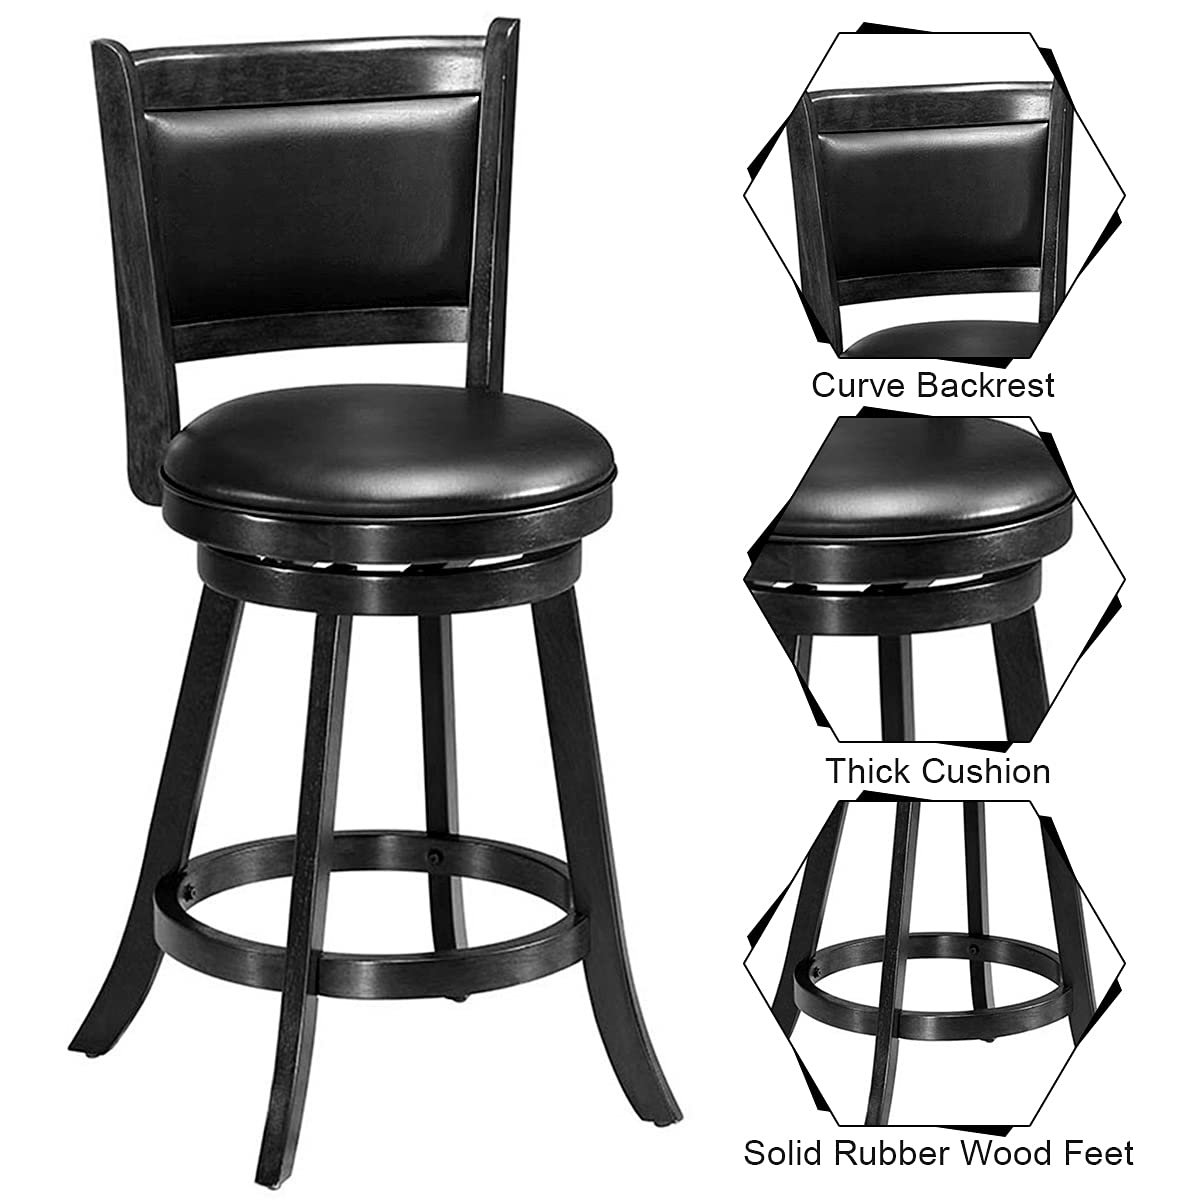 Giantex Accent Wooden Swivel Back Counter Height Bar Stool, Fabric Upholstered Design